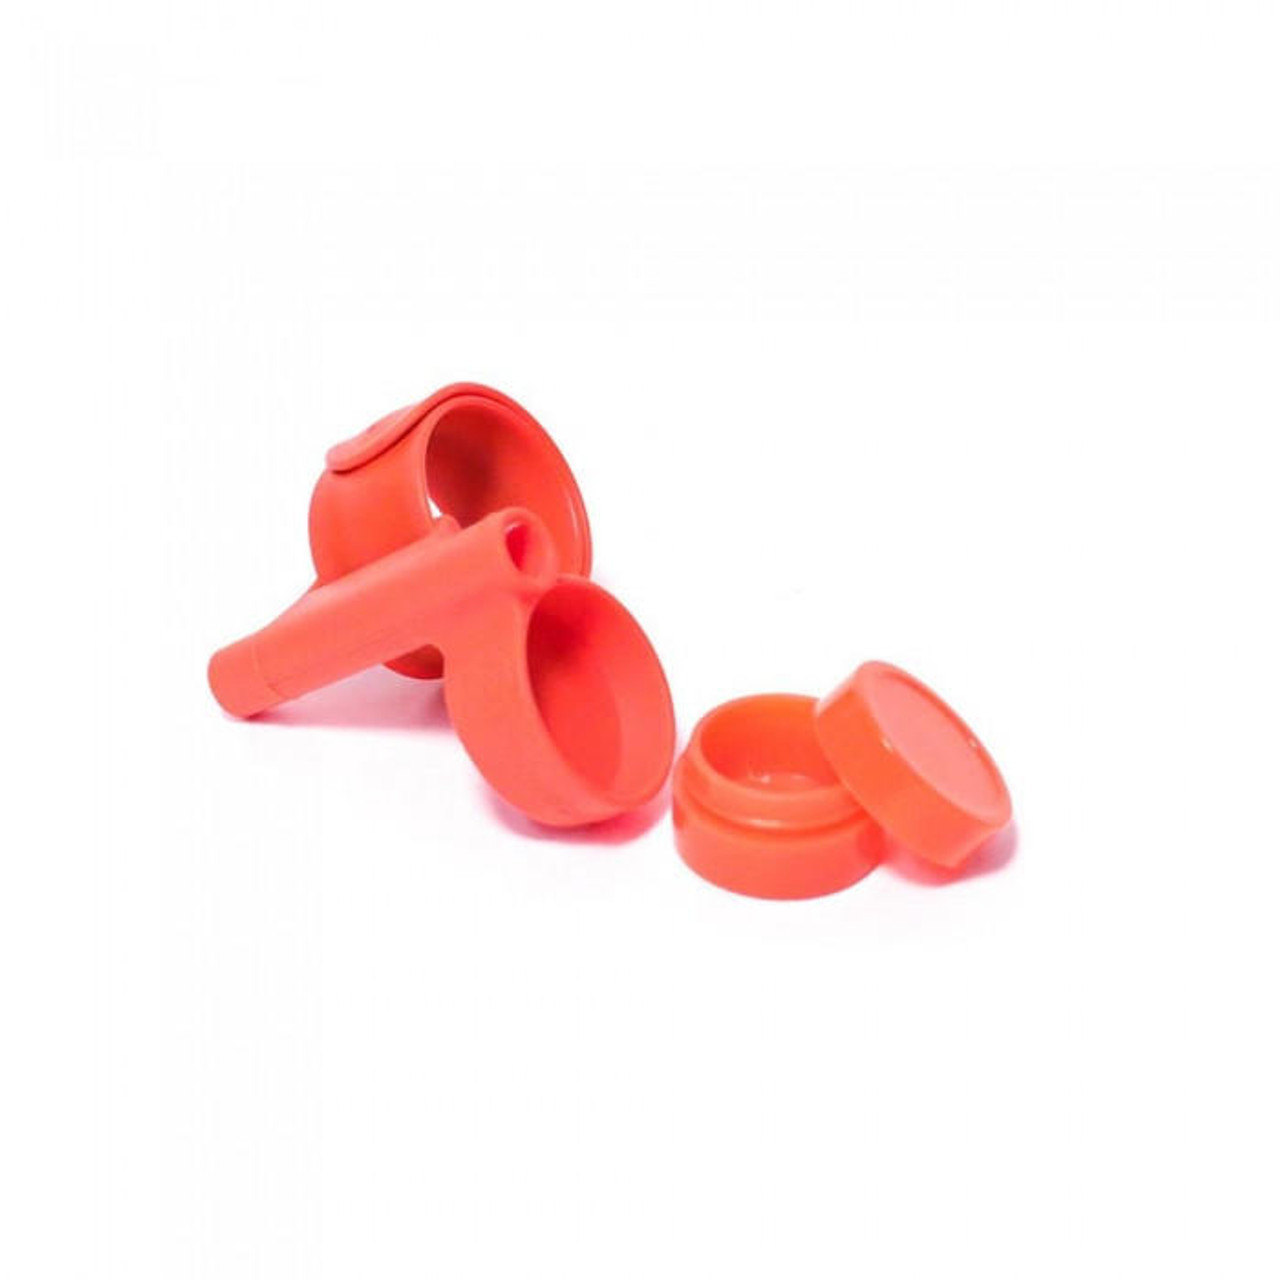 Silicone Dab Container: Large - 37ml - Assorted Colors